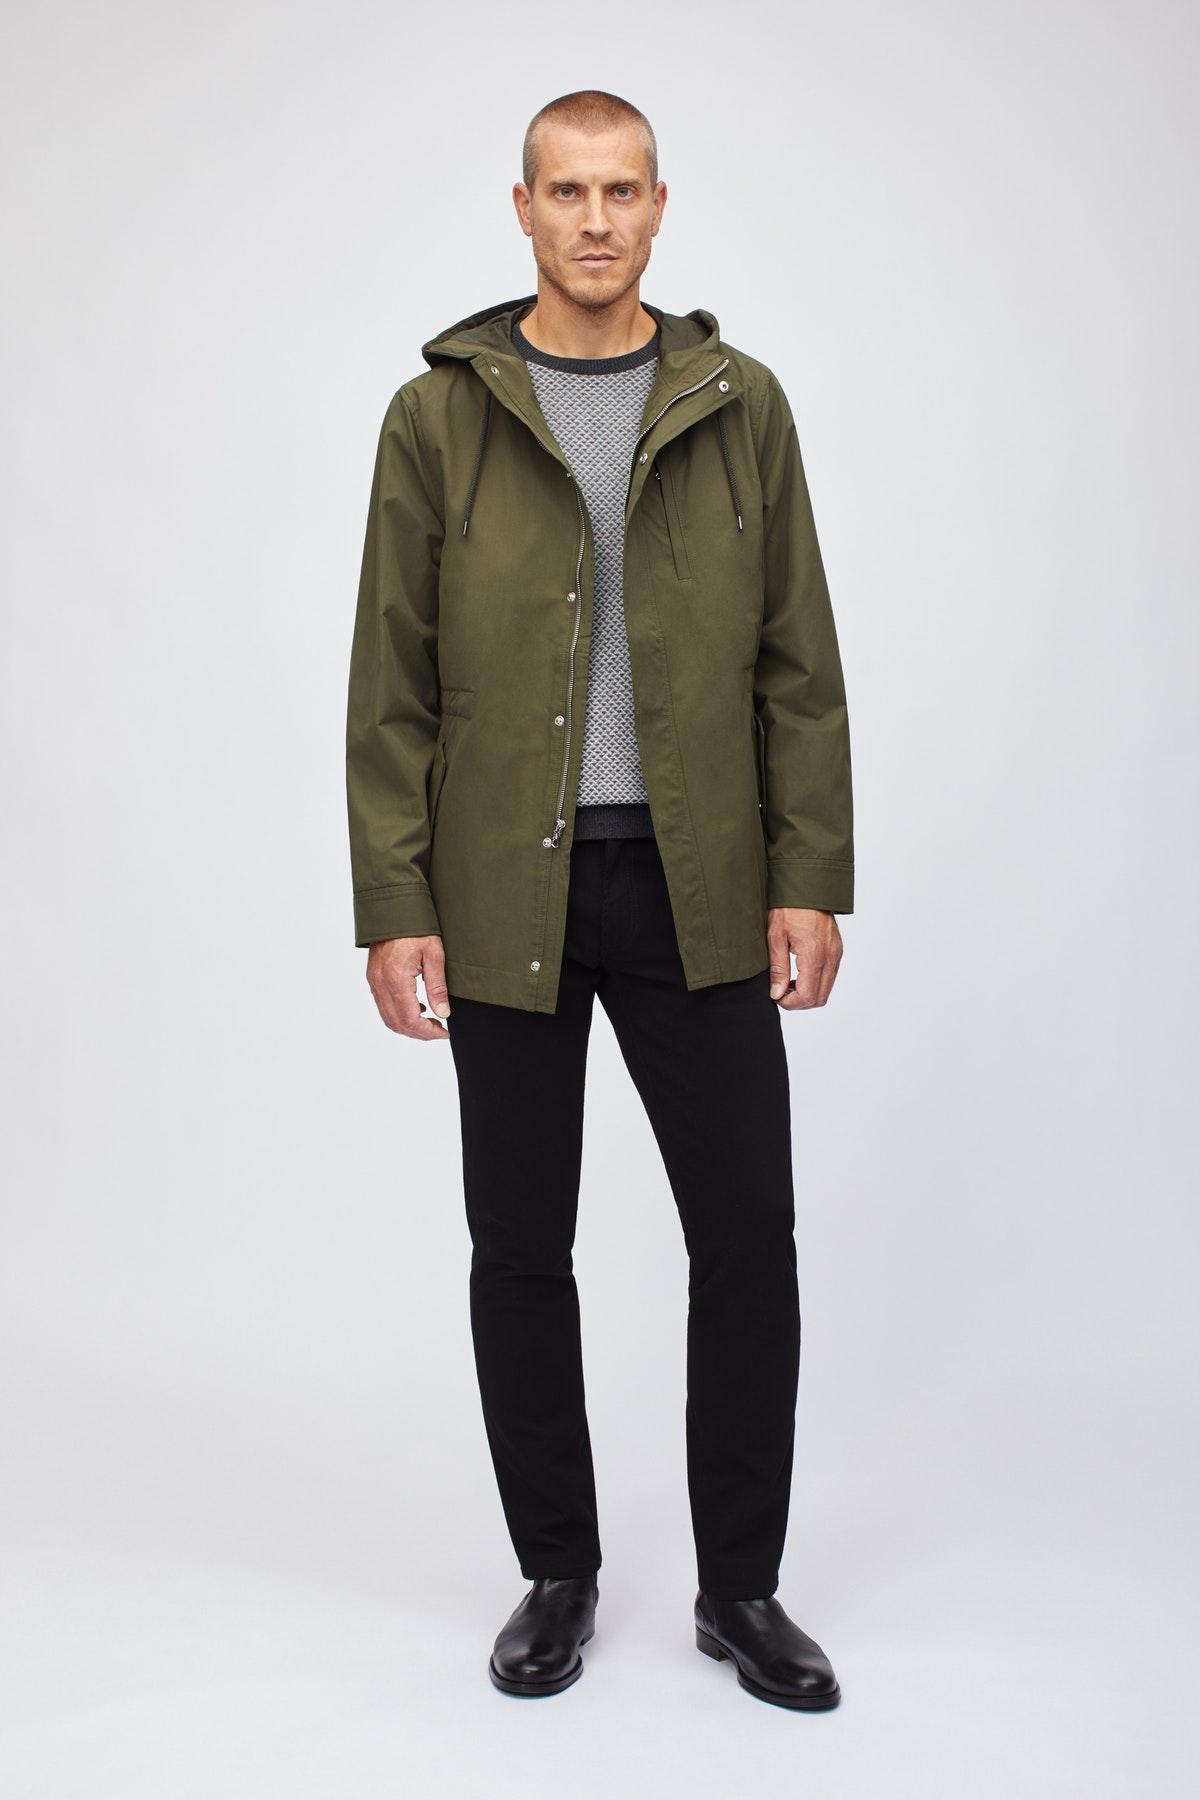 Bonobos Cotton The Hooded Field Jacket in Olive (Green) for Men - Lyst